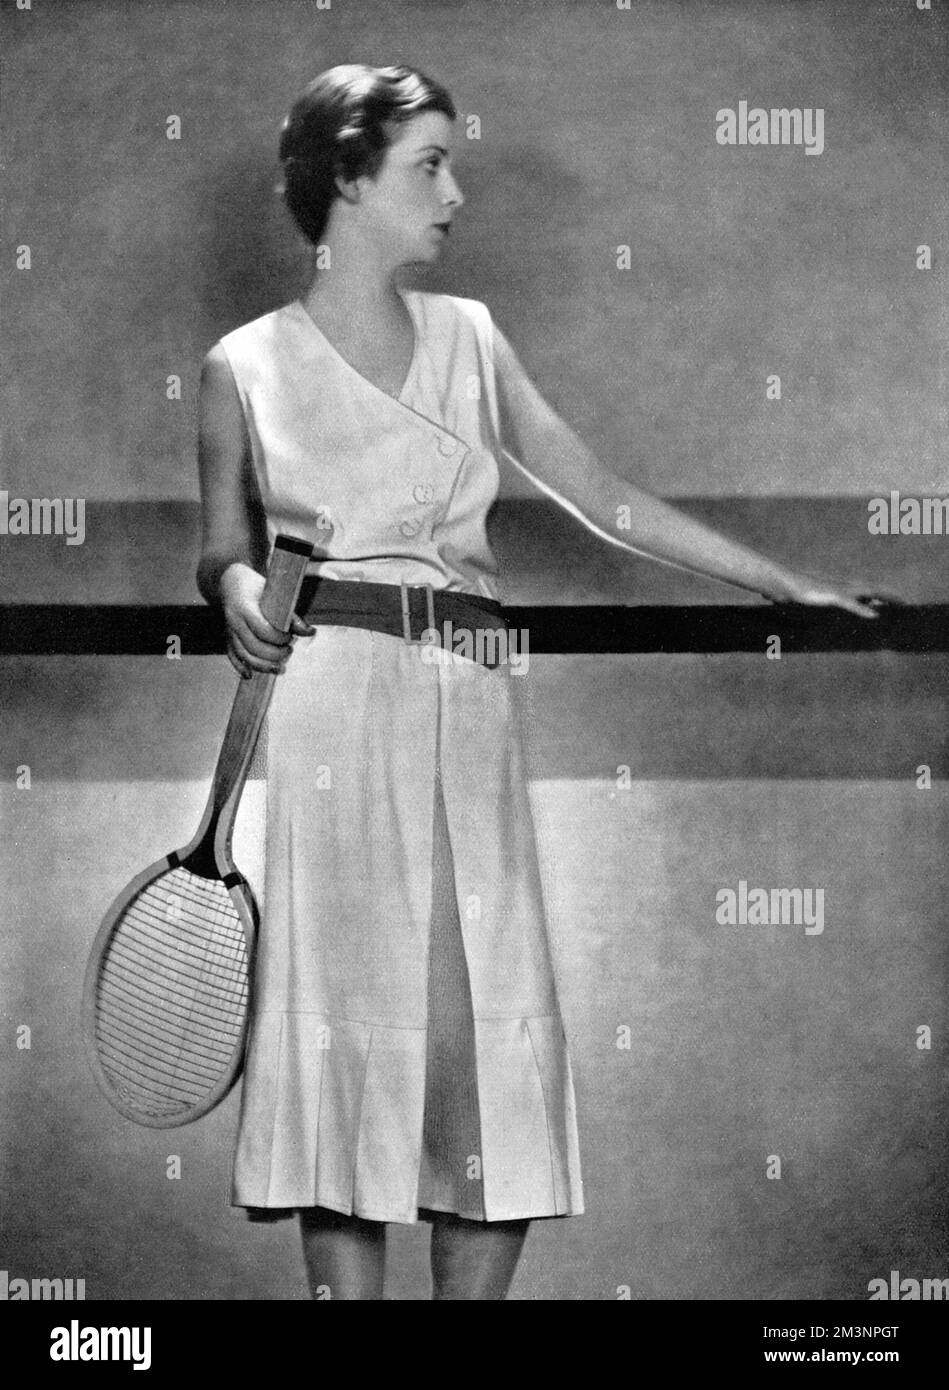 An exclusive Bystander photograph showing the designer, Elsa Schiparelli's practical but stylish jupe-pantalon tennis dress in light white woollen weave with a waist belt of orange coloured tussore.  The style which feature culottes or a divided skirt was adopted by the Spanish tennis star Lili de Alvarez who wore Schiaparelli's designs at Wimbledon in 1931, causing a sensation.     Date: 1930 Stock Photo